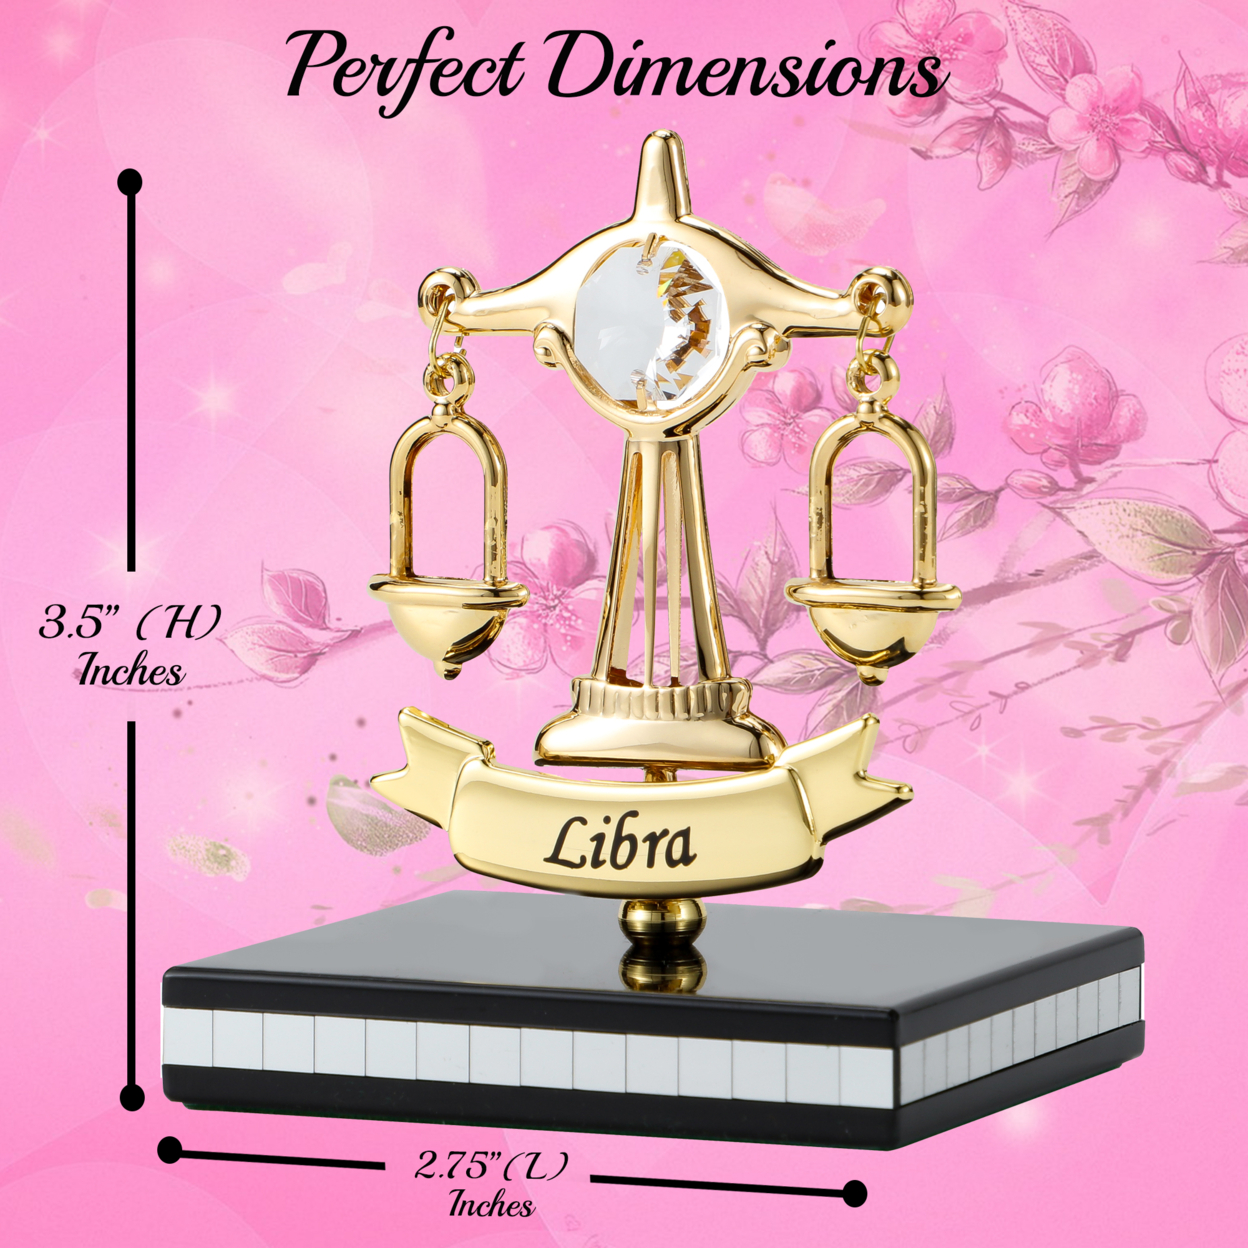 Matashi 24K Gold Plated Zodiac Astrological Sign Libra Figurine Statuette On Stand Studded With Crystals Gift For Mom Girlfriend Wife Dad